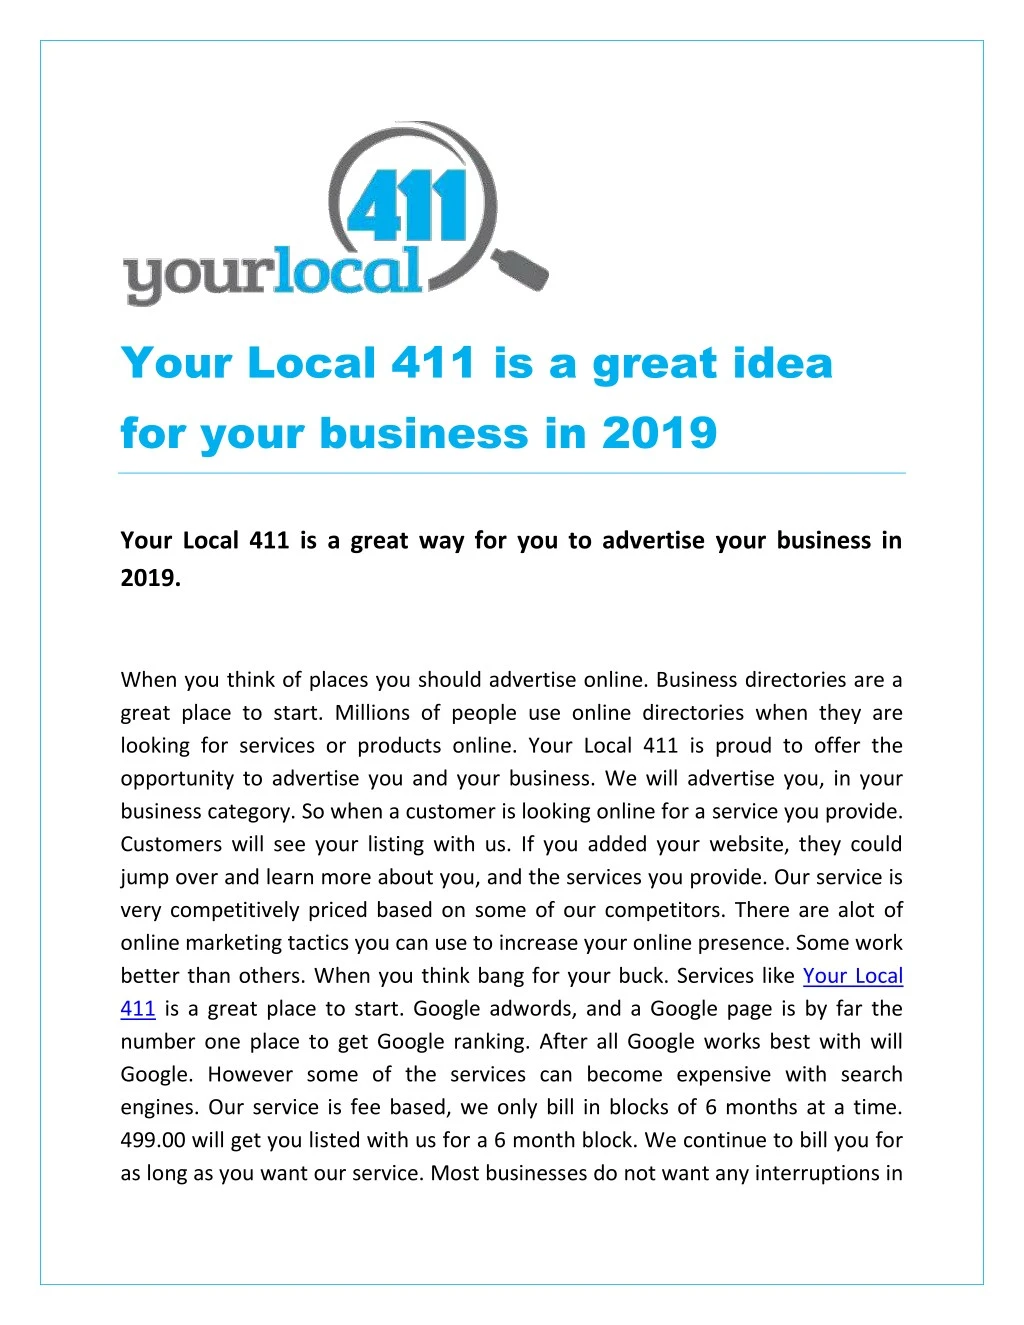 your local 411 is a great idea for your business